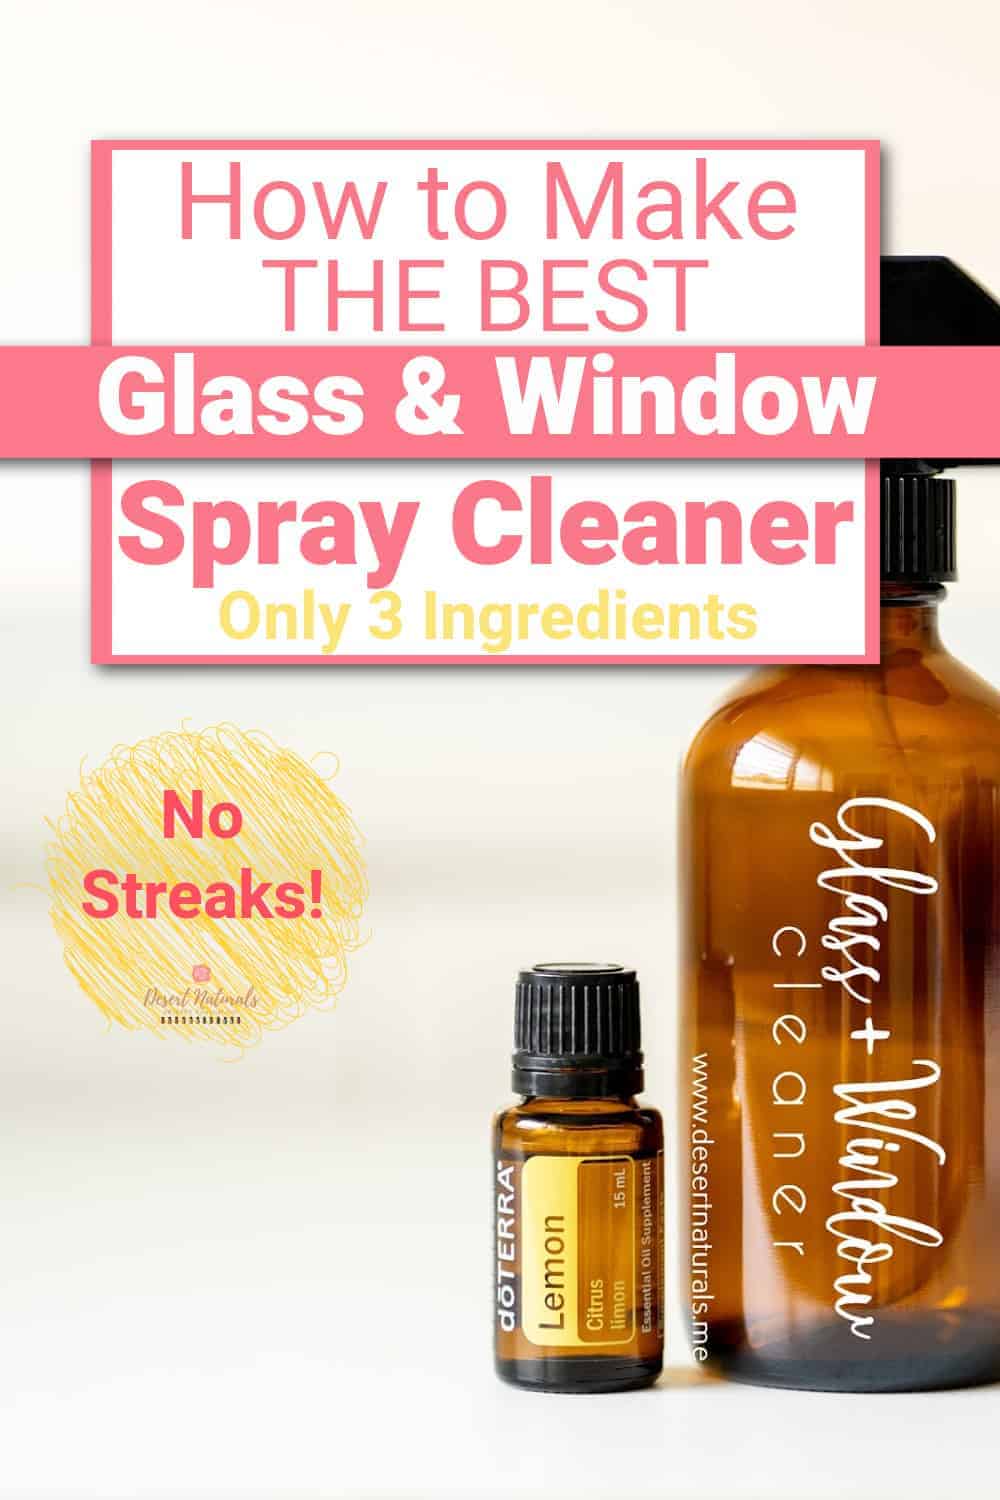 how to make the best glass & window spray cleaner with only 3 ingredients! No streaks! Uses doTERRA lemon essential oil